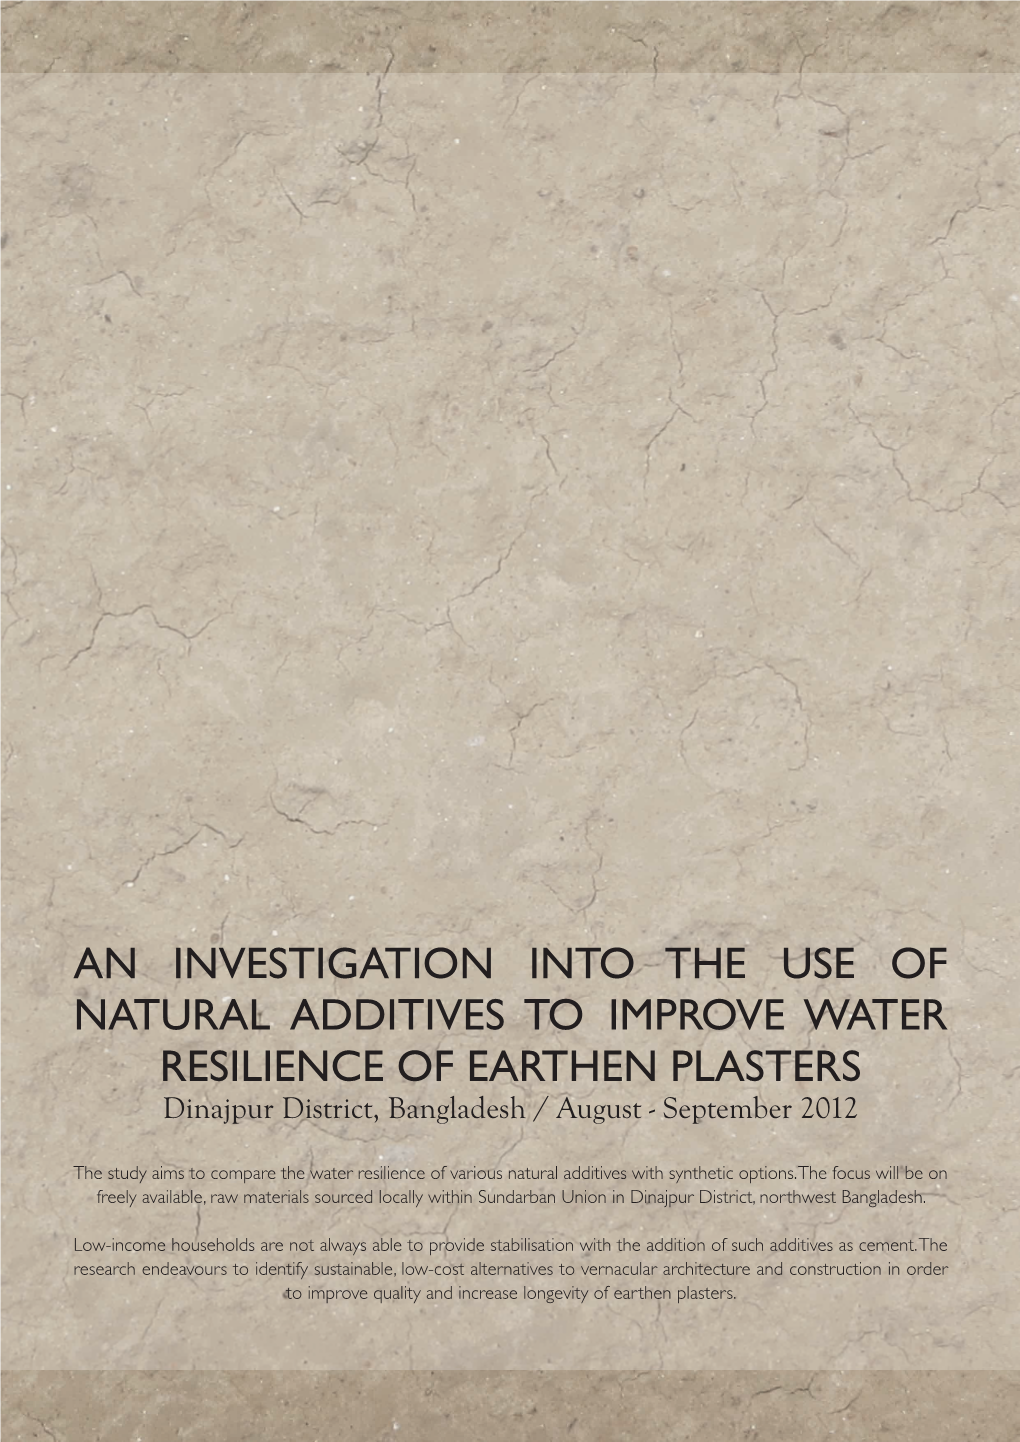 AN INVESTIGATION INTO the USE of NATURAL ADDITIVES to IMPROVE WATER RESILIENCE of EARTHEN PLASTERS Dinajpur District, Bangladesh / August - September 2012